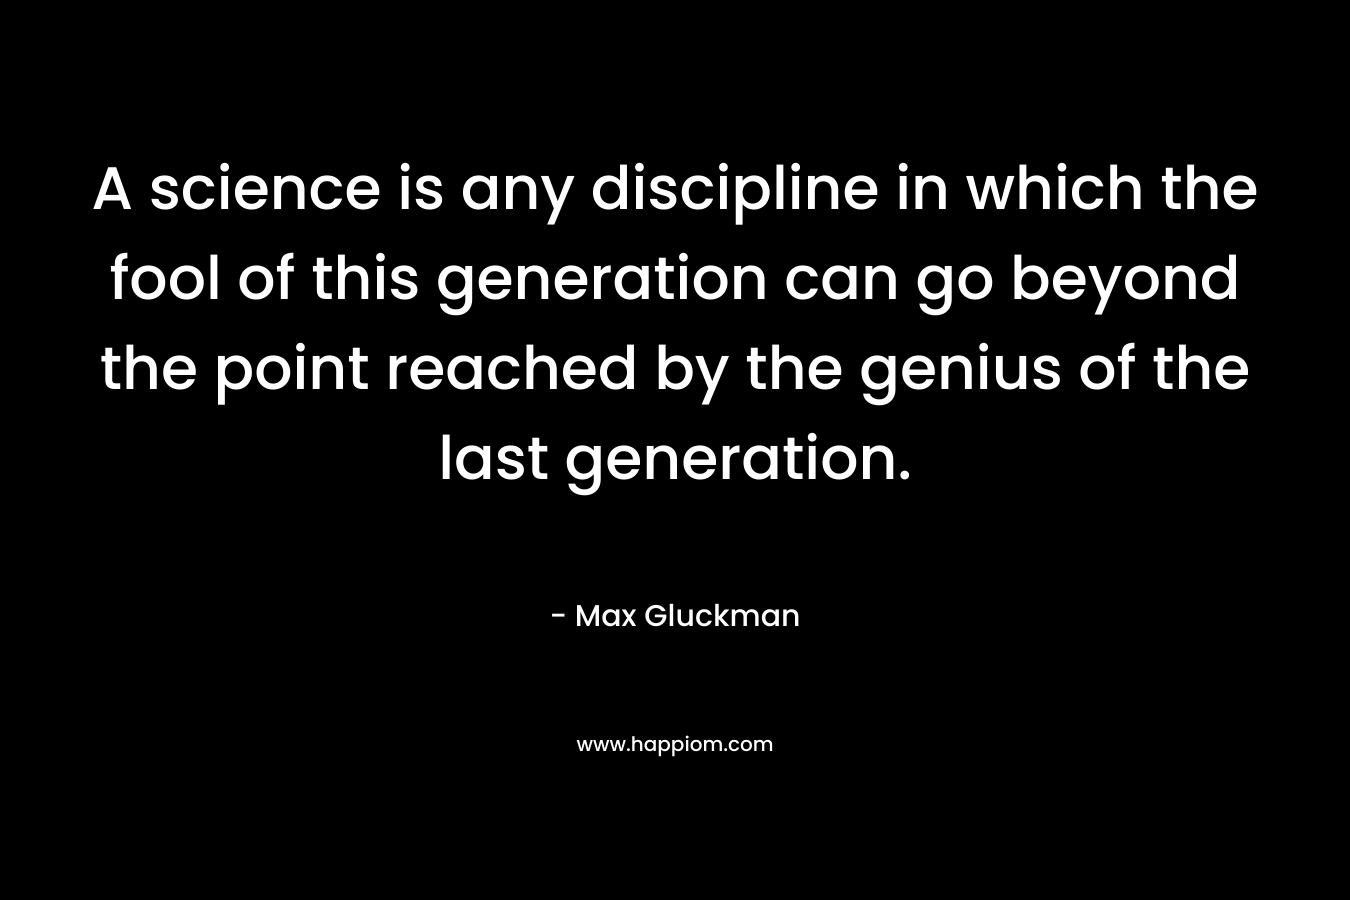 A science is any discipline in which the fool of this generation can go beyond the point reached by the genius of the last generation. – Max Gluckman